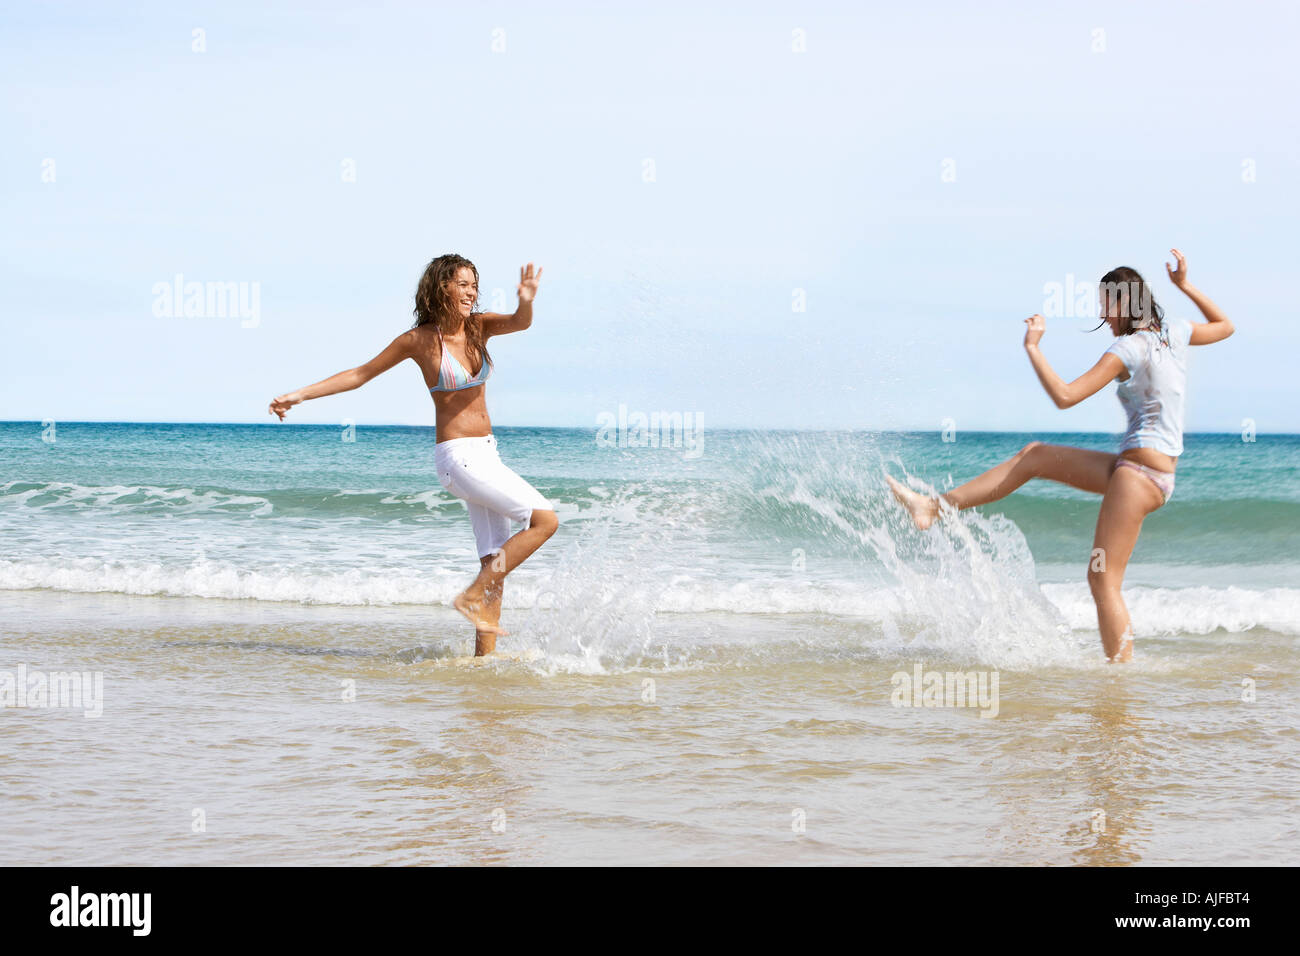 Two Young Women Splashing Each Other on Beach Stock Photo